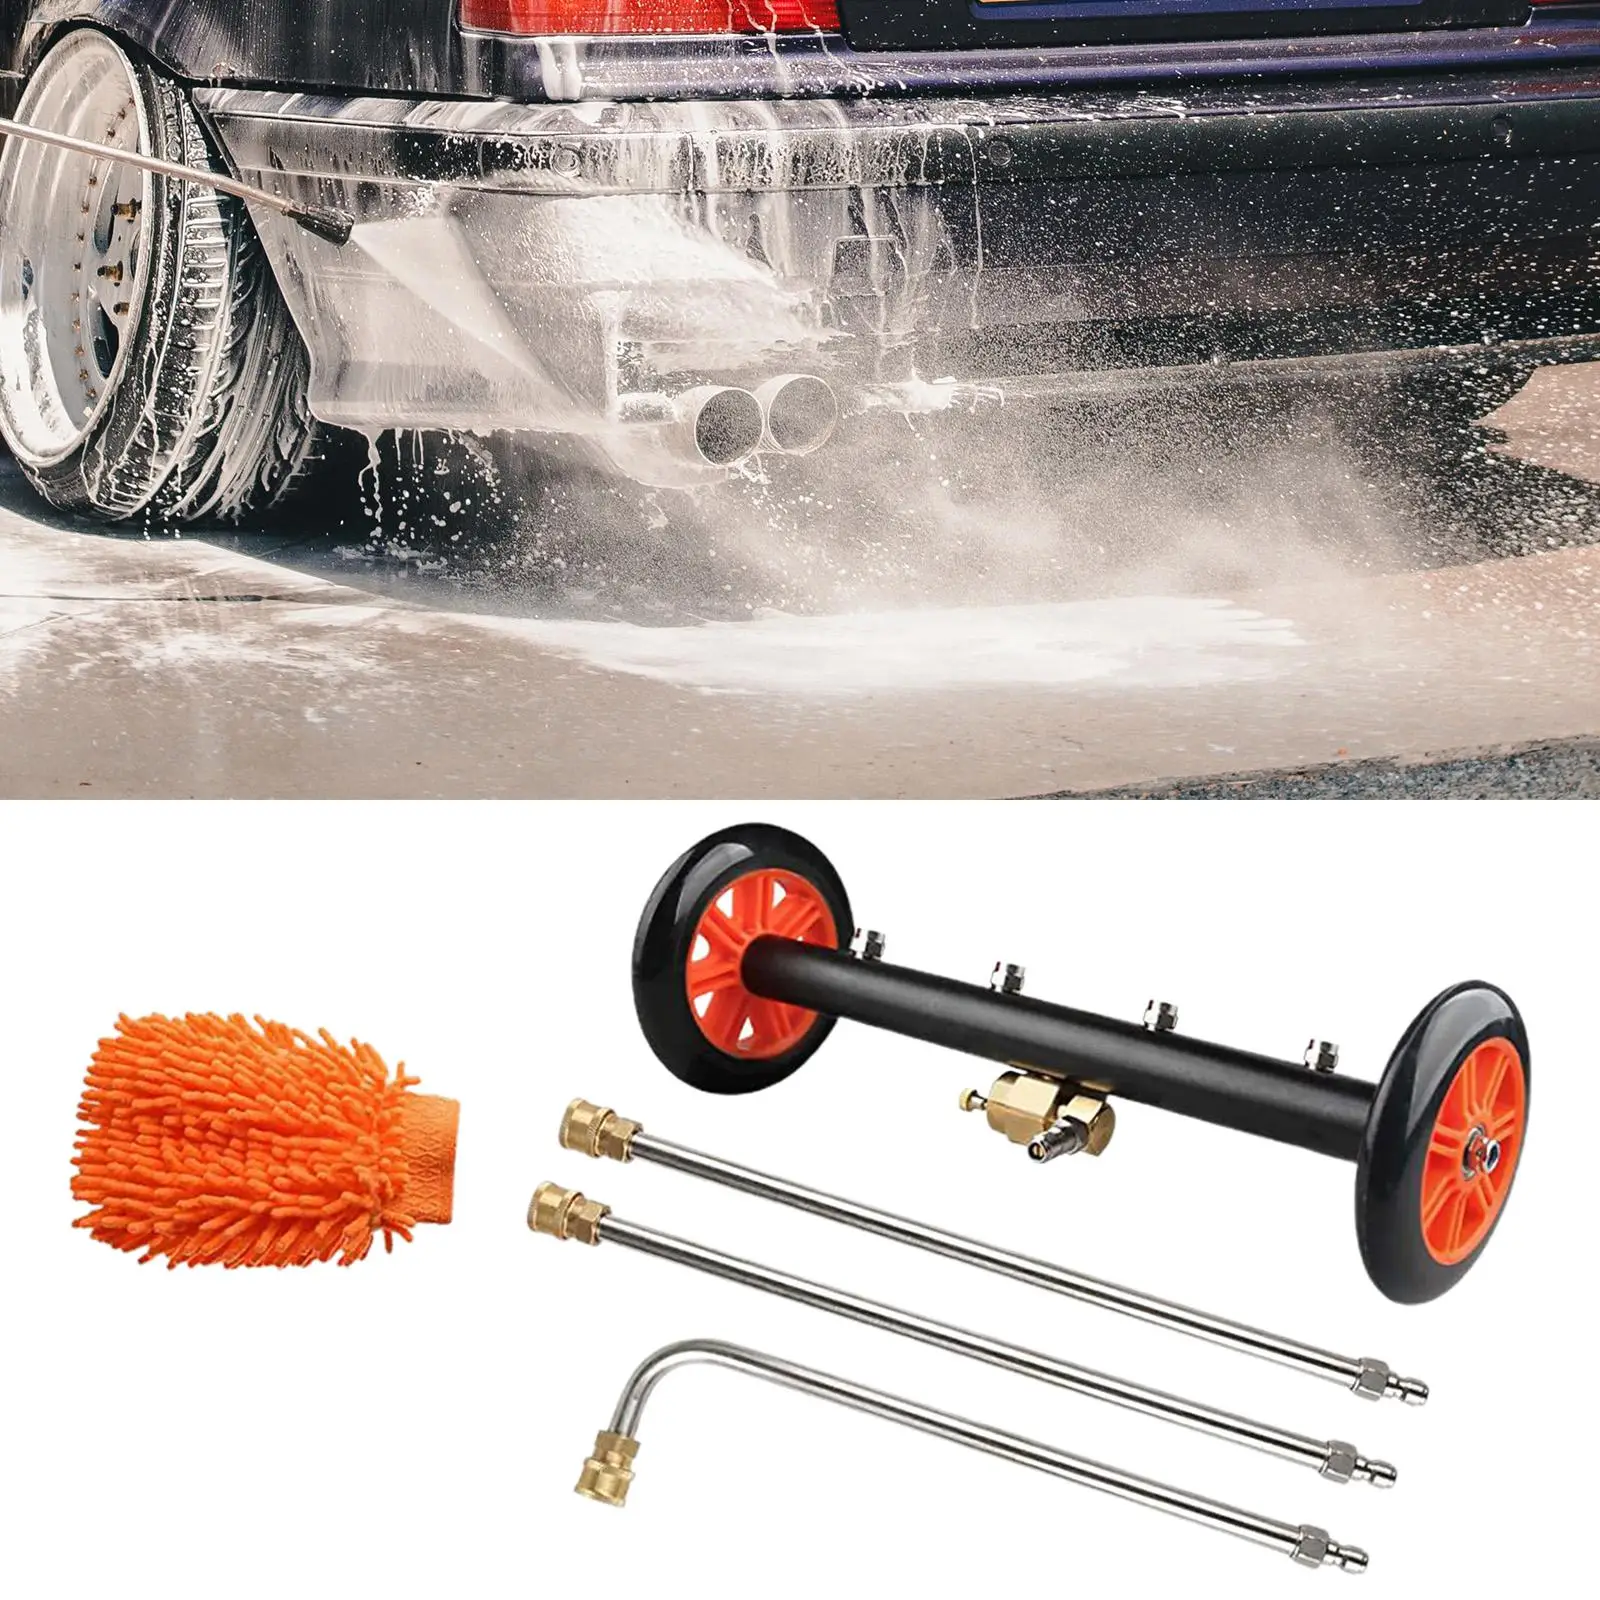 Dual Purpose Undercarriage Pressure Washer Attachment Adjustable Power Washer Surface Cleaner for Boats Driveways Decks Floor